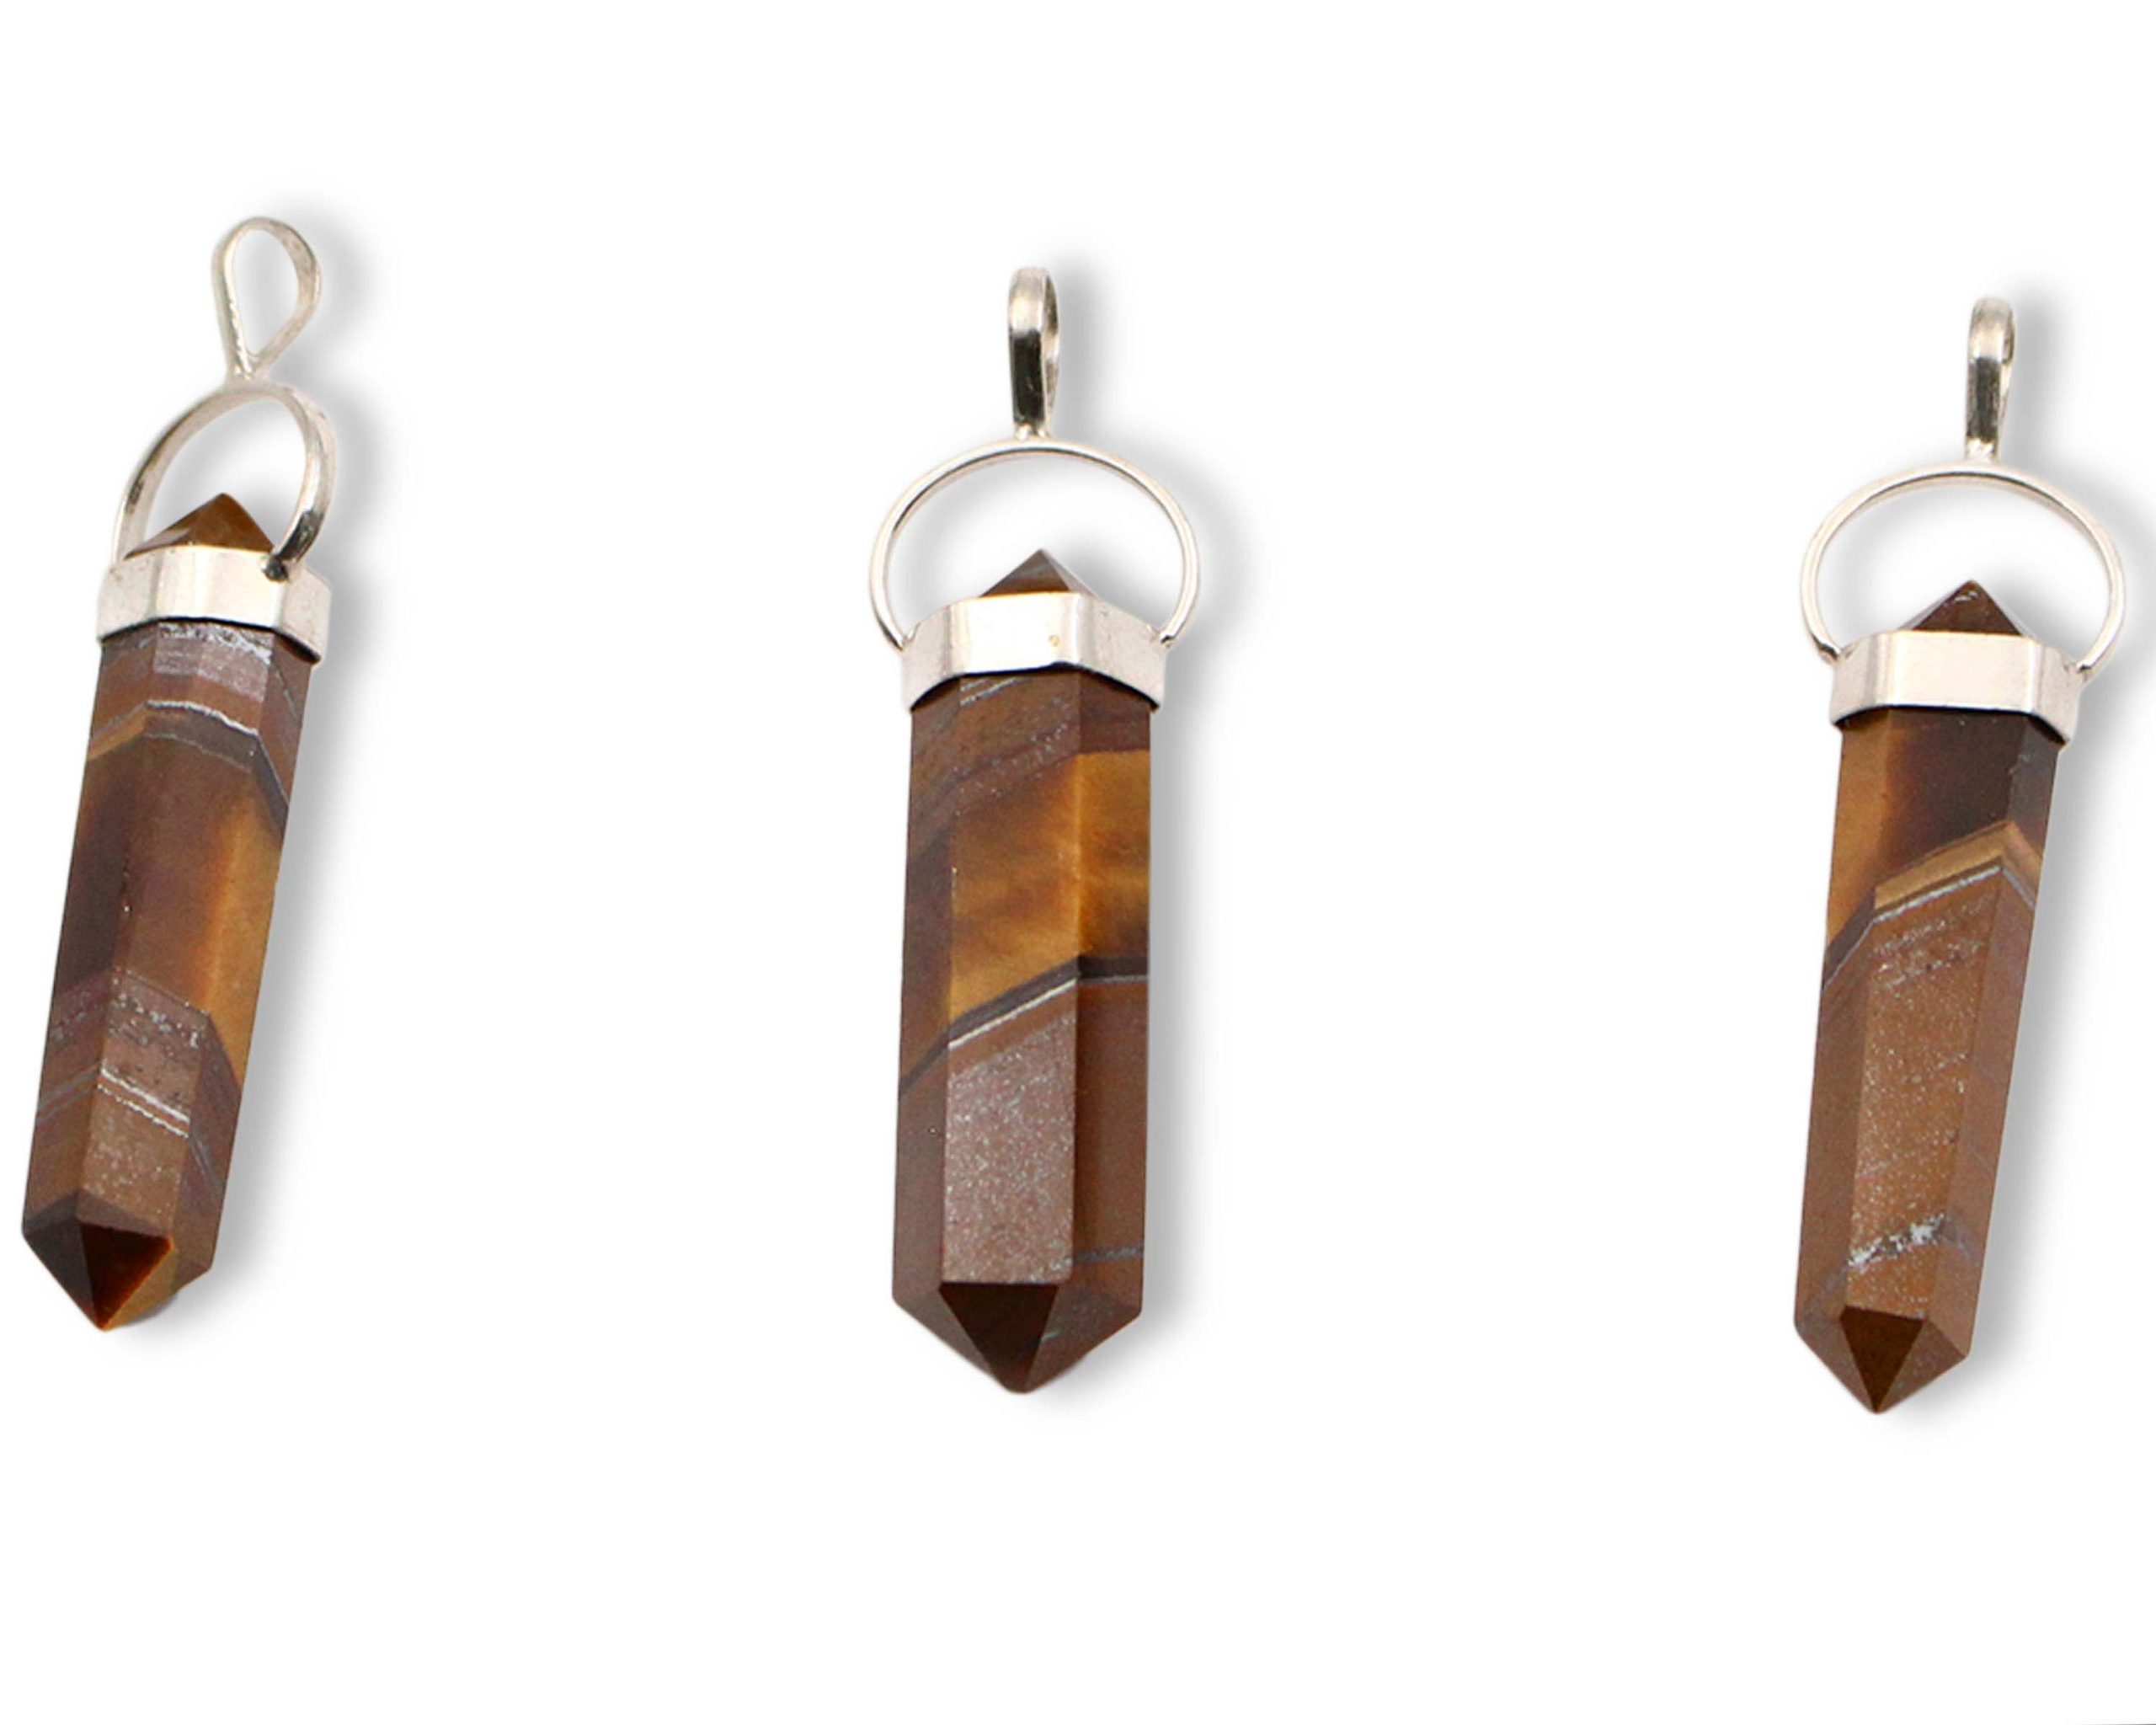 Tiger Eye "Double Point" Sterling Silver Pendant - Crystal Dreams